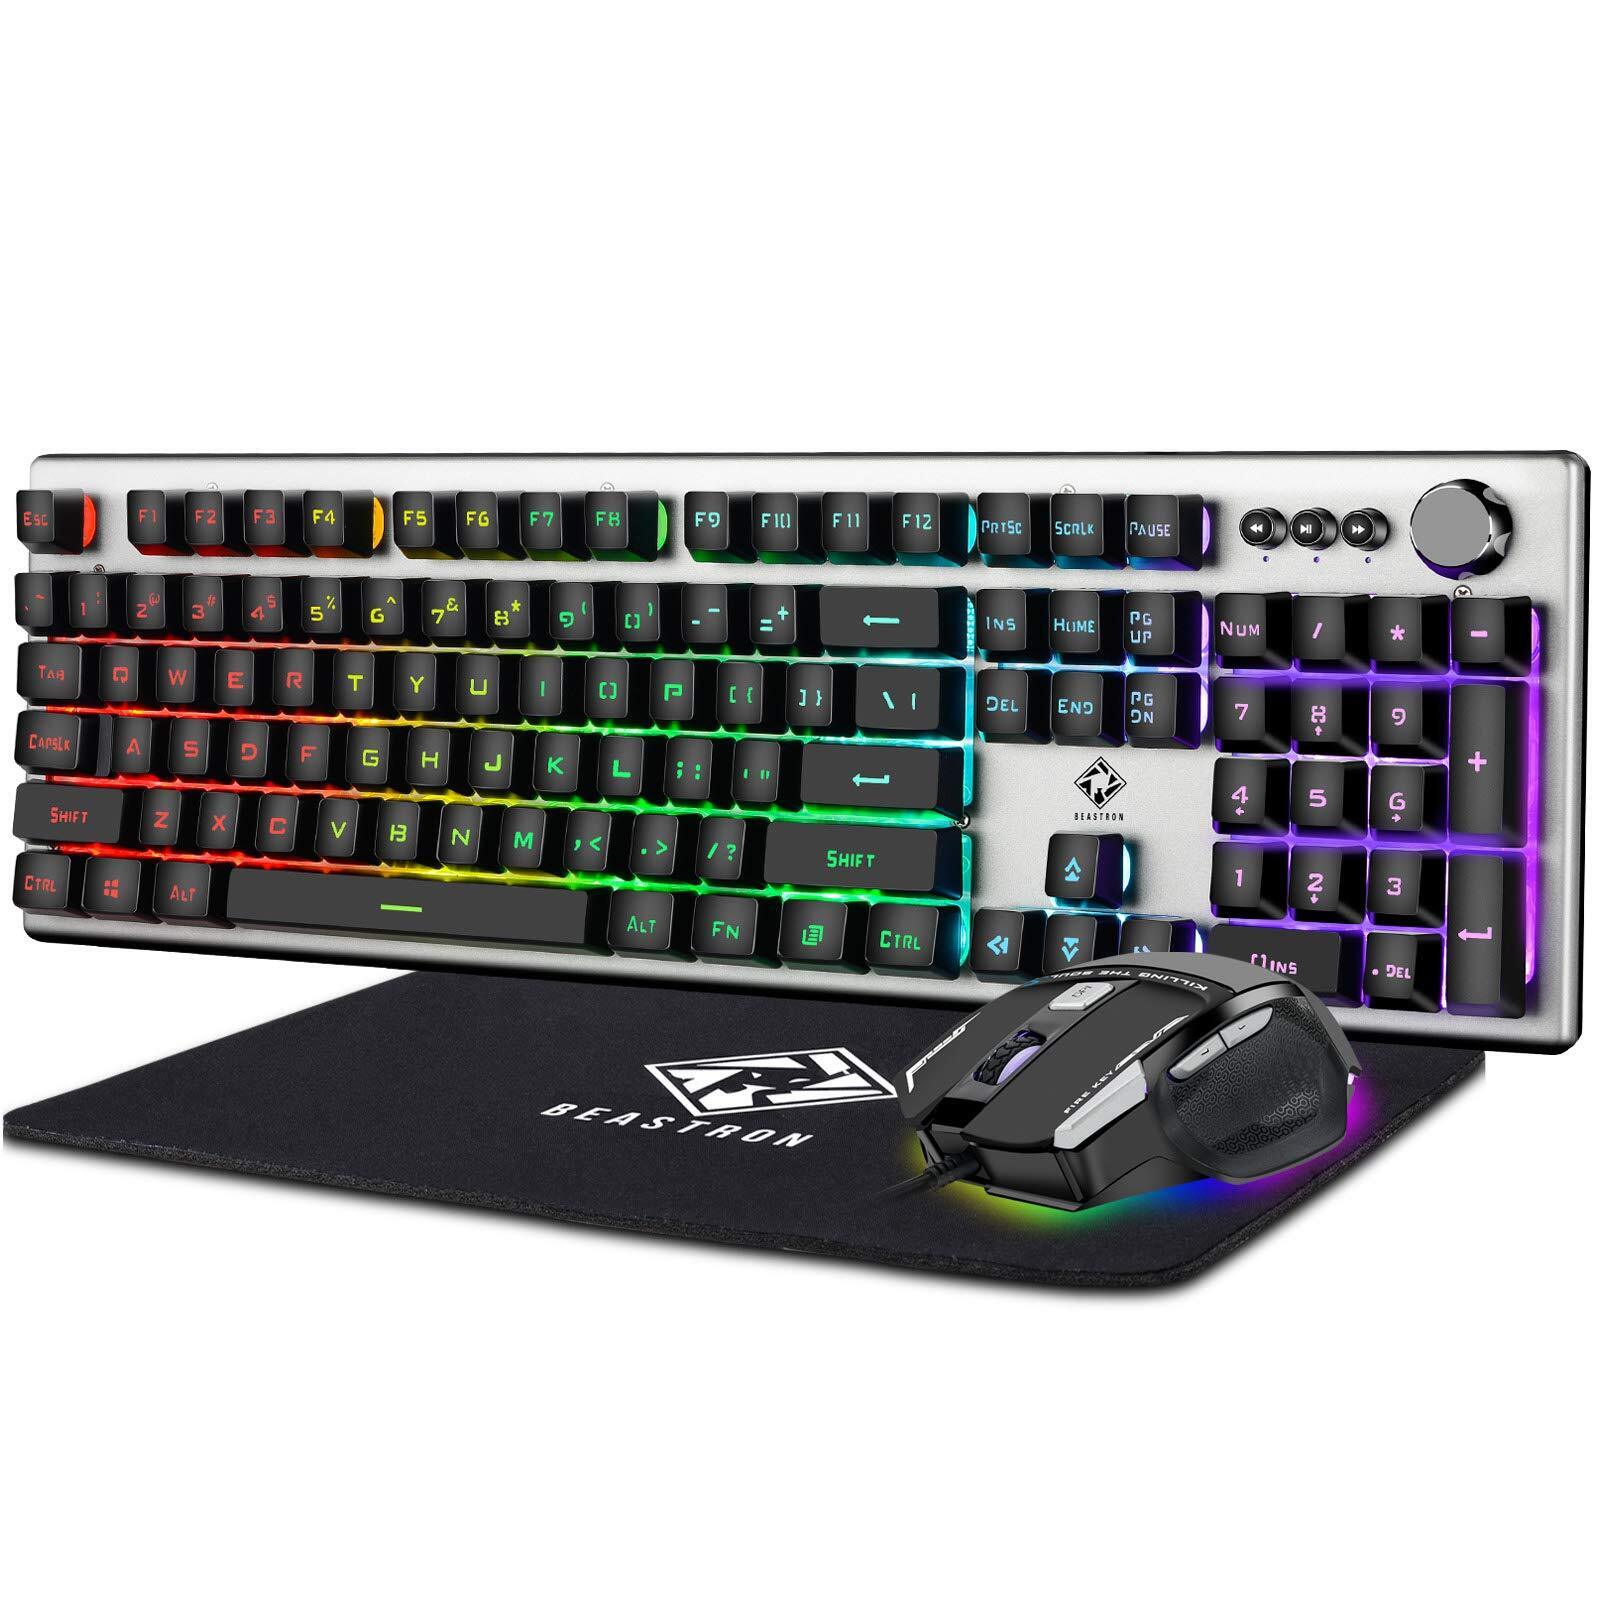 RGB Backlit Gaming Keyboard with Mouse Combo and Mouse pad, Multimedia Keyboa...